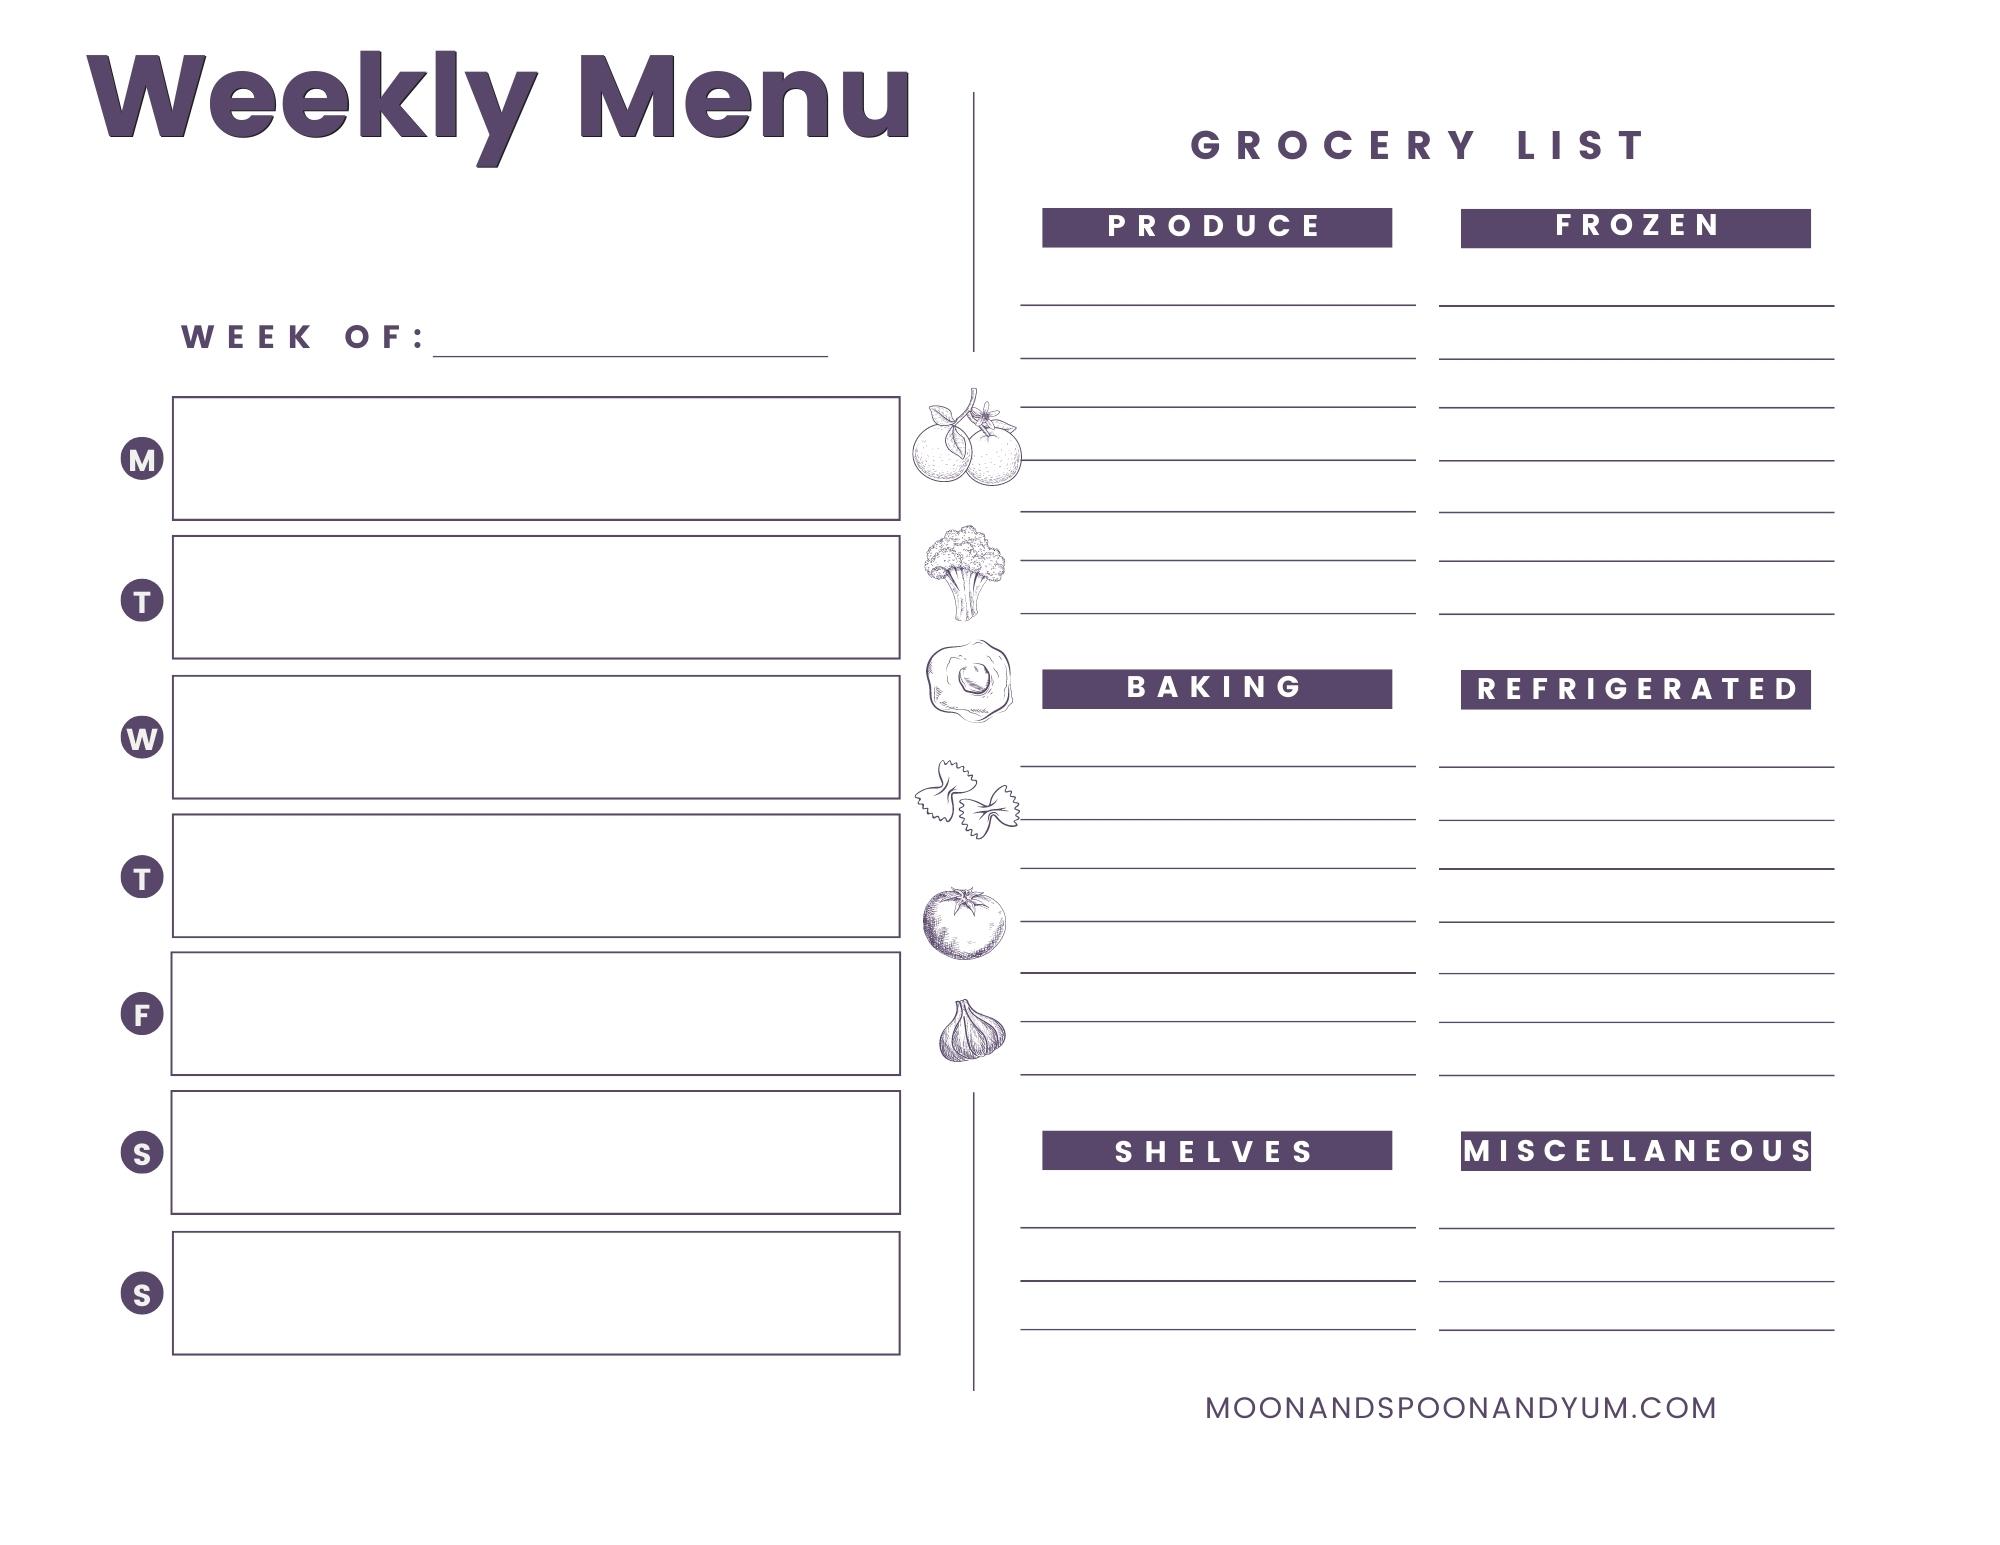 A printable meal planning sheet.